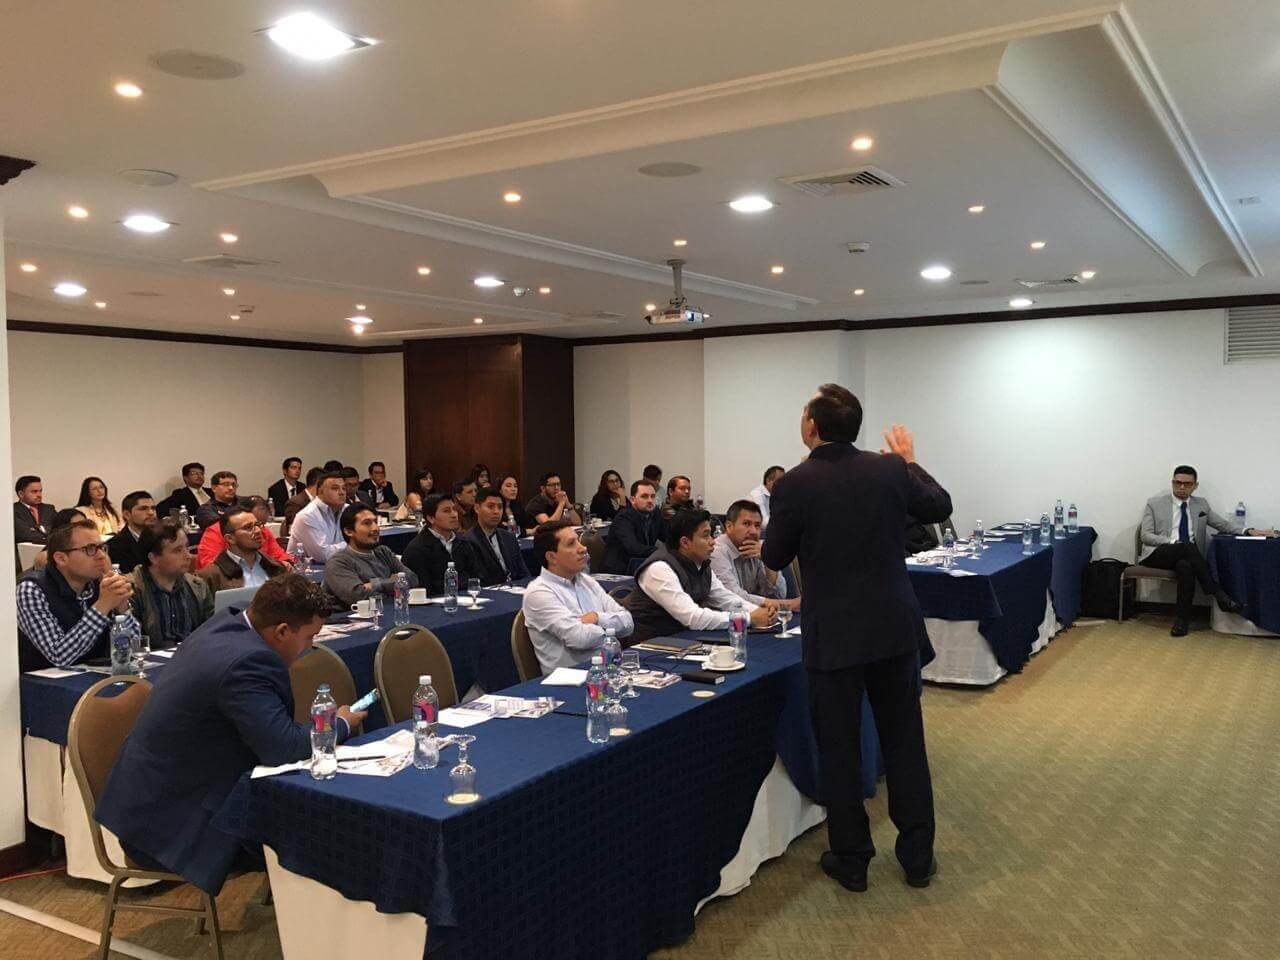 AEC, NACE and Grupo Testek in a Corrosion Monitoring and Inspection Workshop-News-MCS